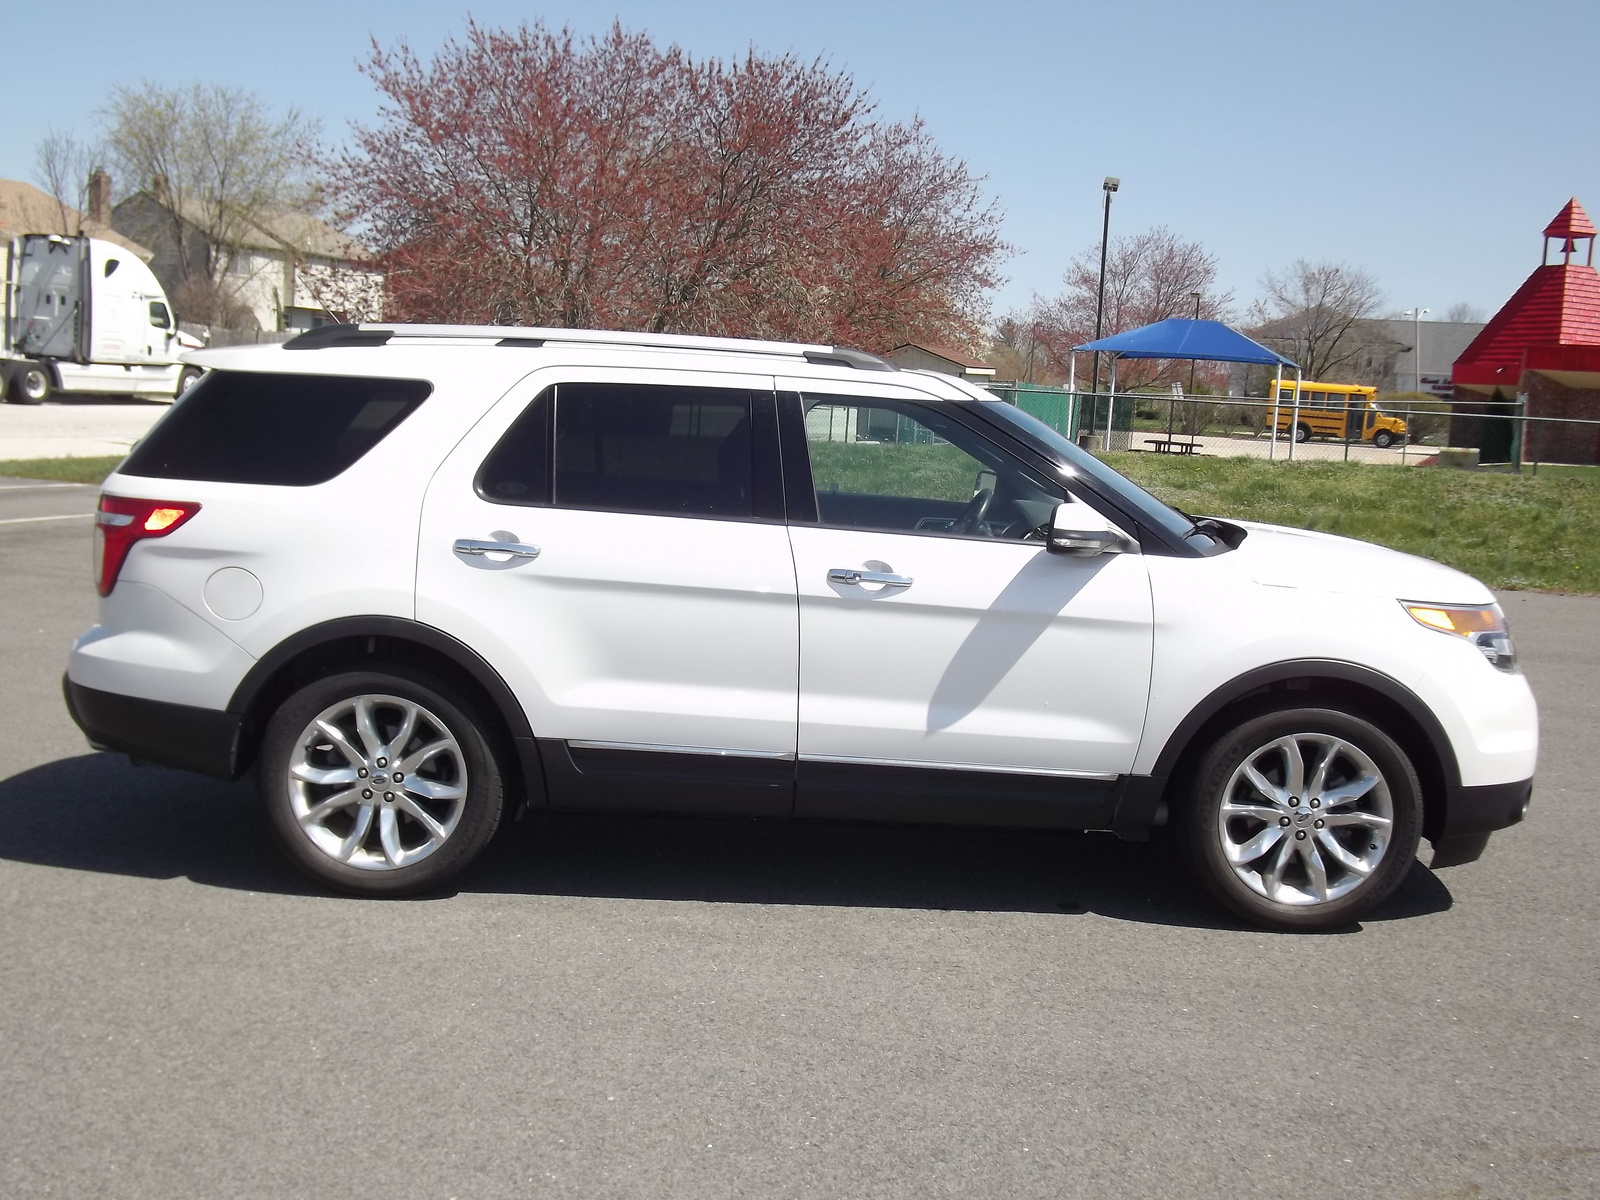 2011 Ford explorer limited video #2